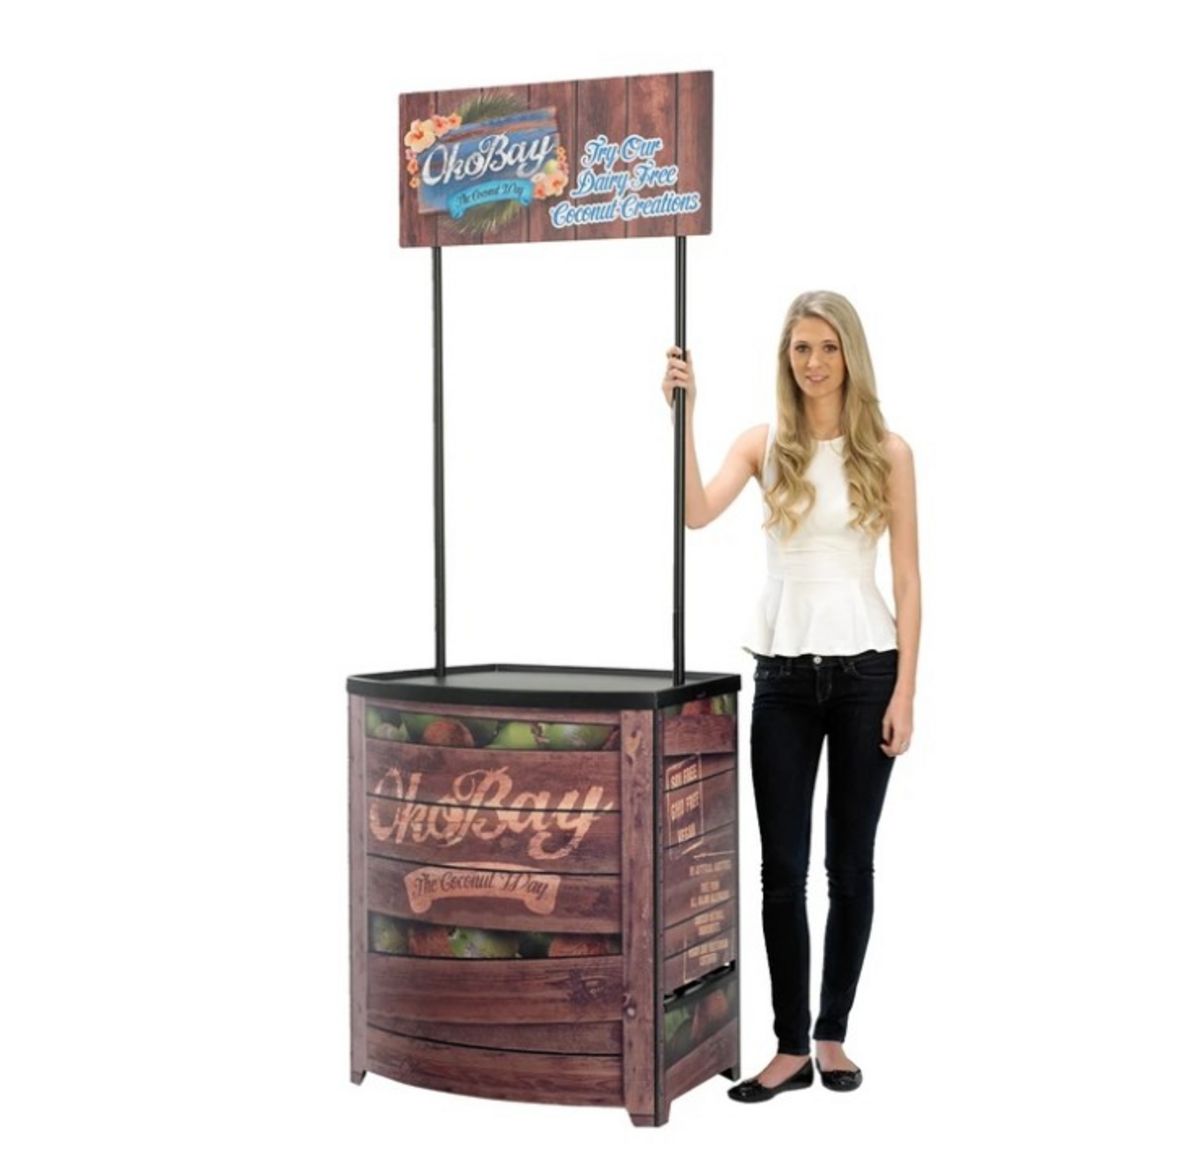 Lady standing next to completed Demo Center promotional display counter..jpg